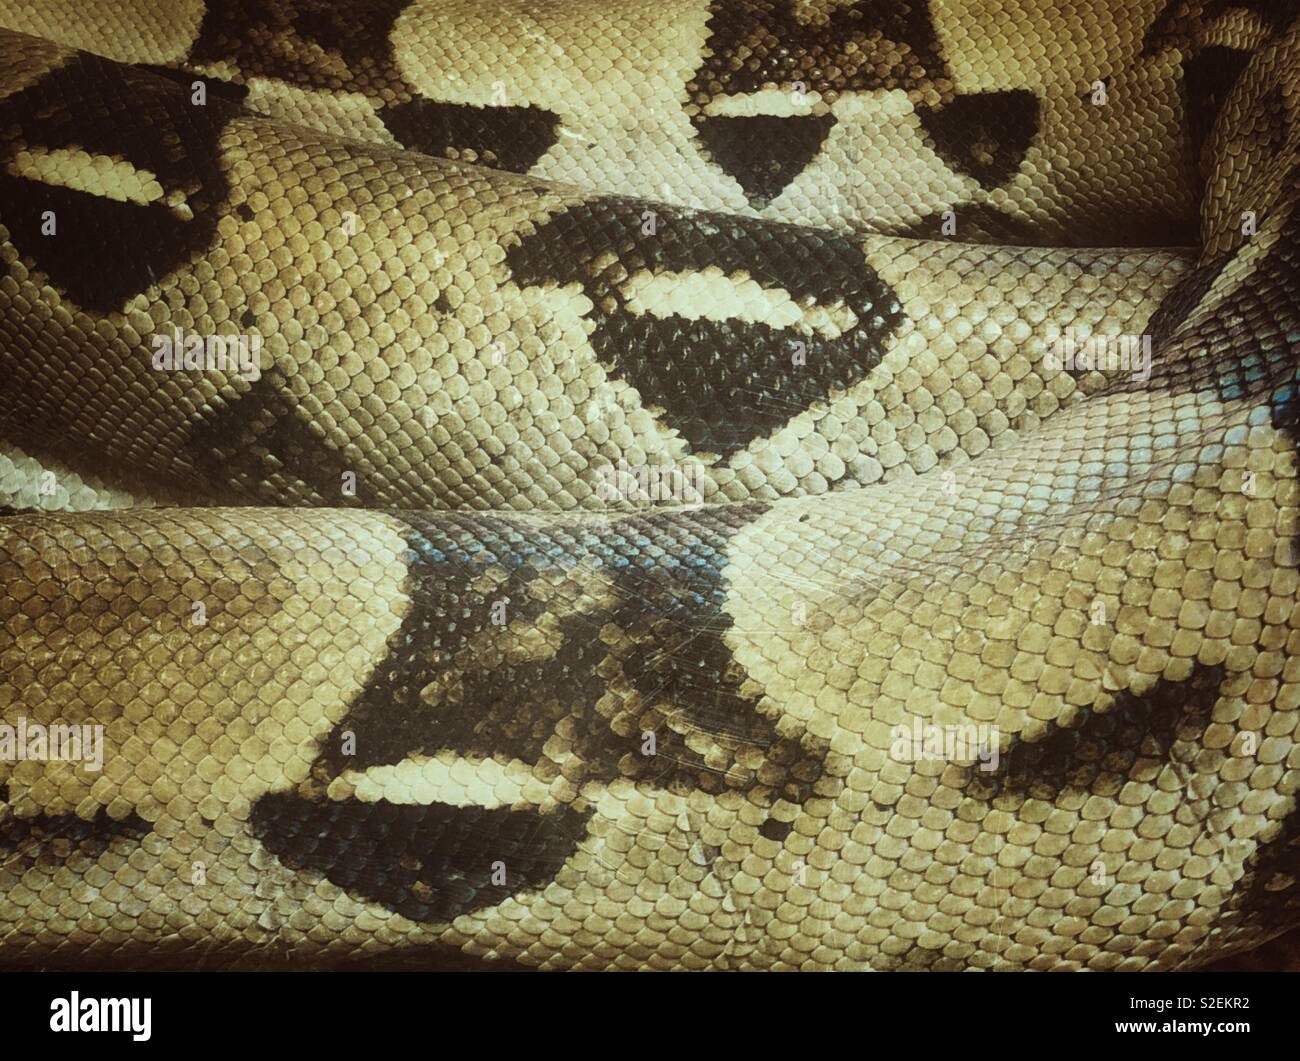 Closeup of black and brown boa constrictor snake body coiled up Stock Photo